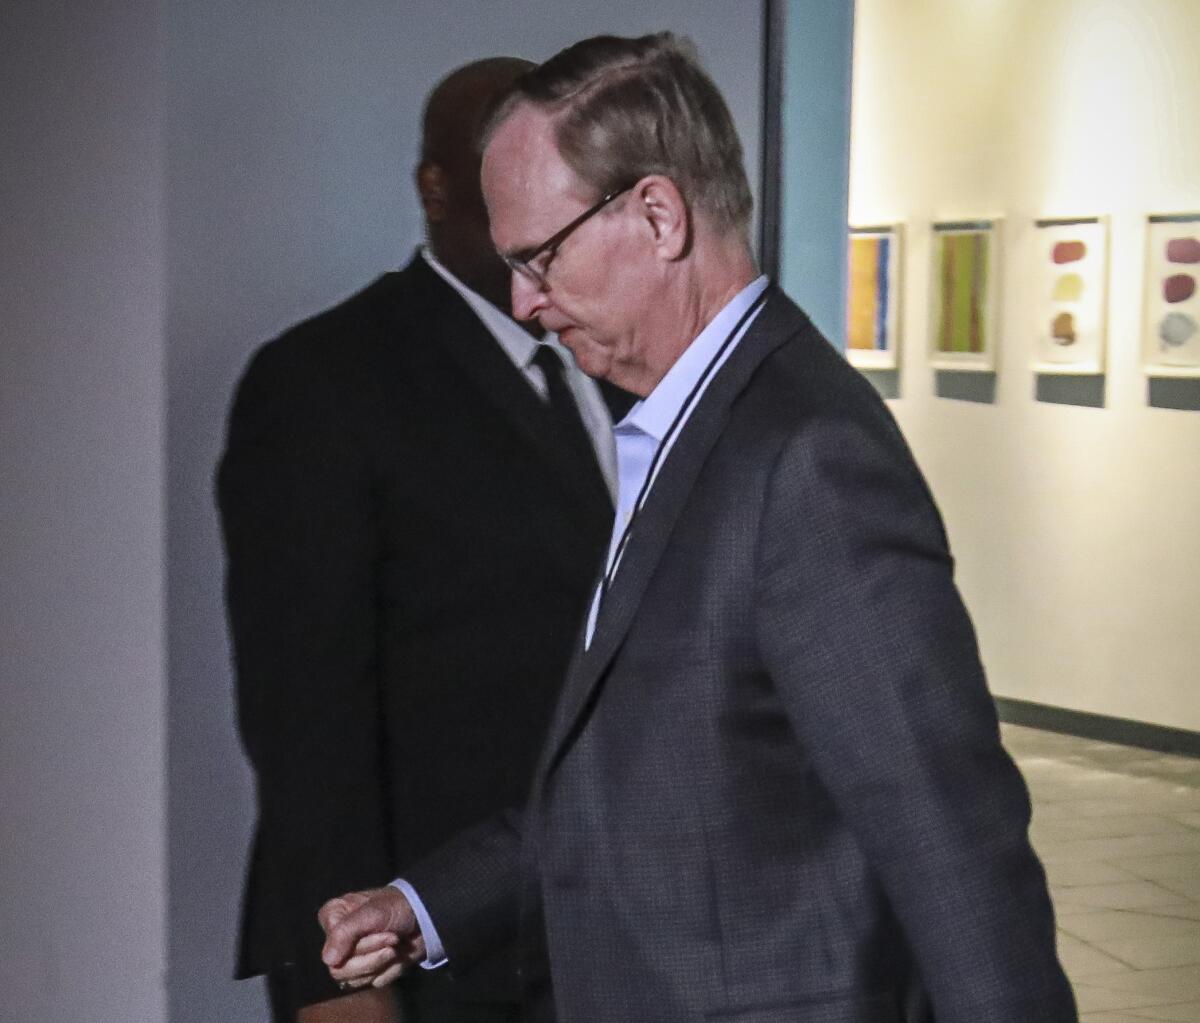 New York Giants owner John Mara arrives for a meeting of NFL owners to discuss a labor agreement with players on Feb. 20 in New York.